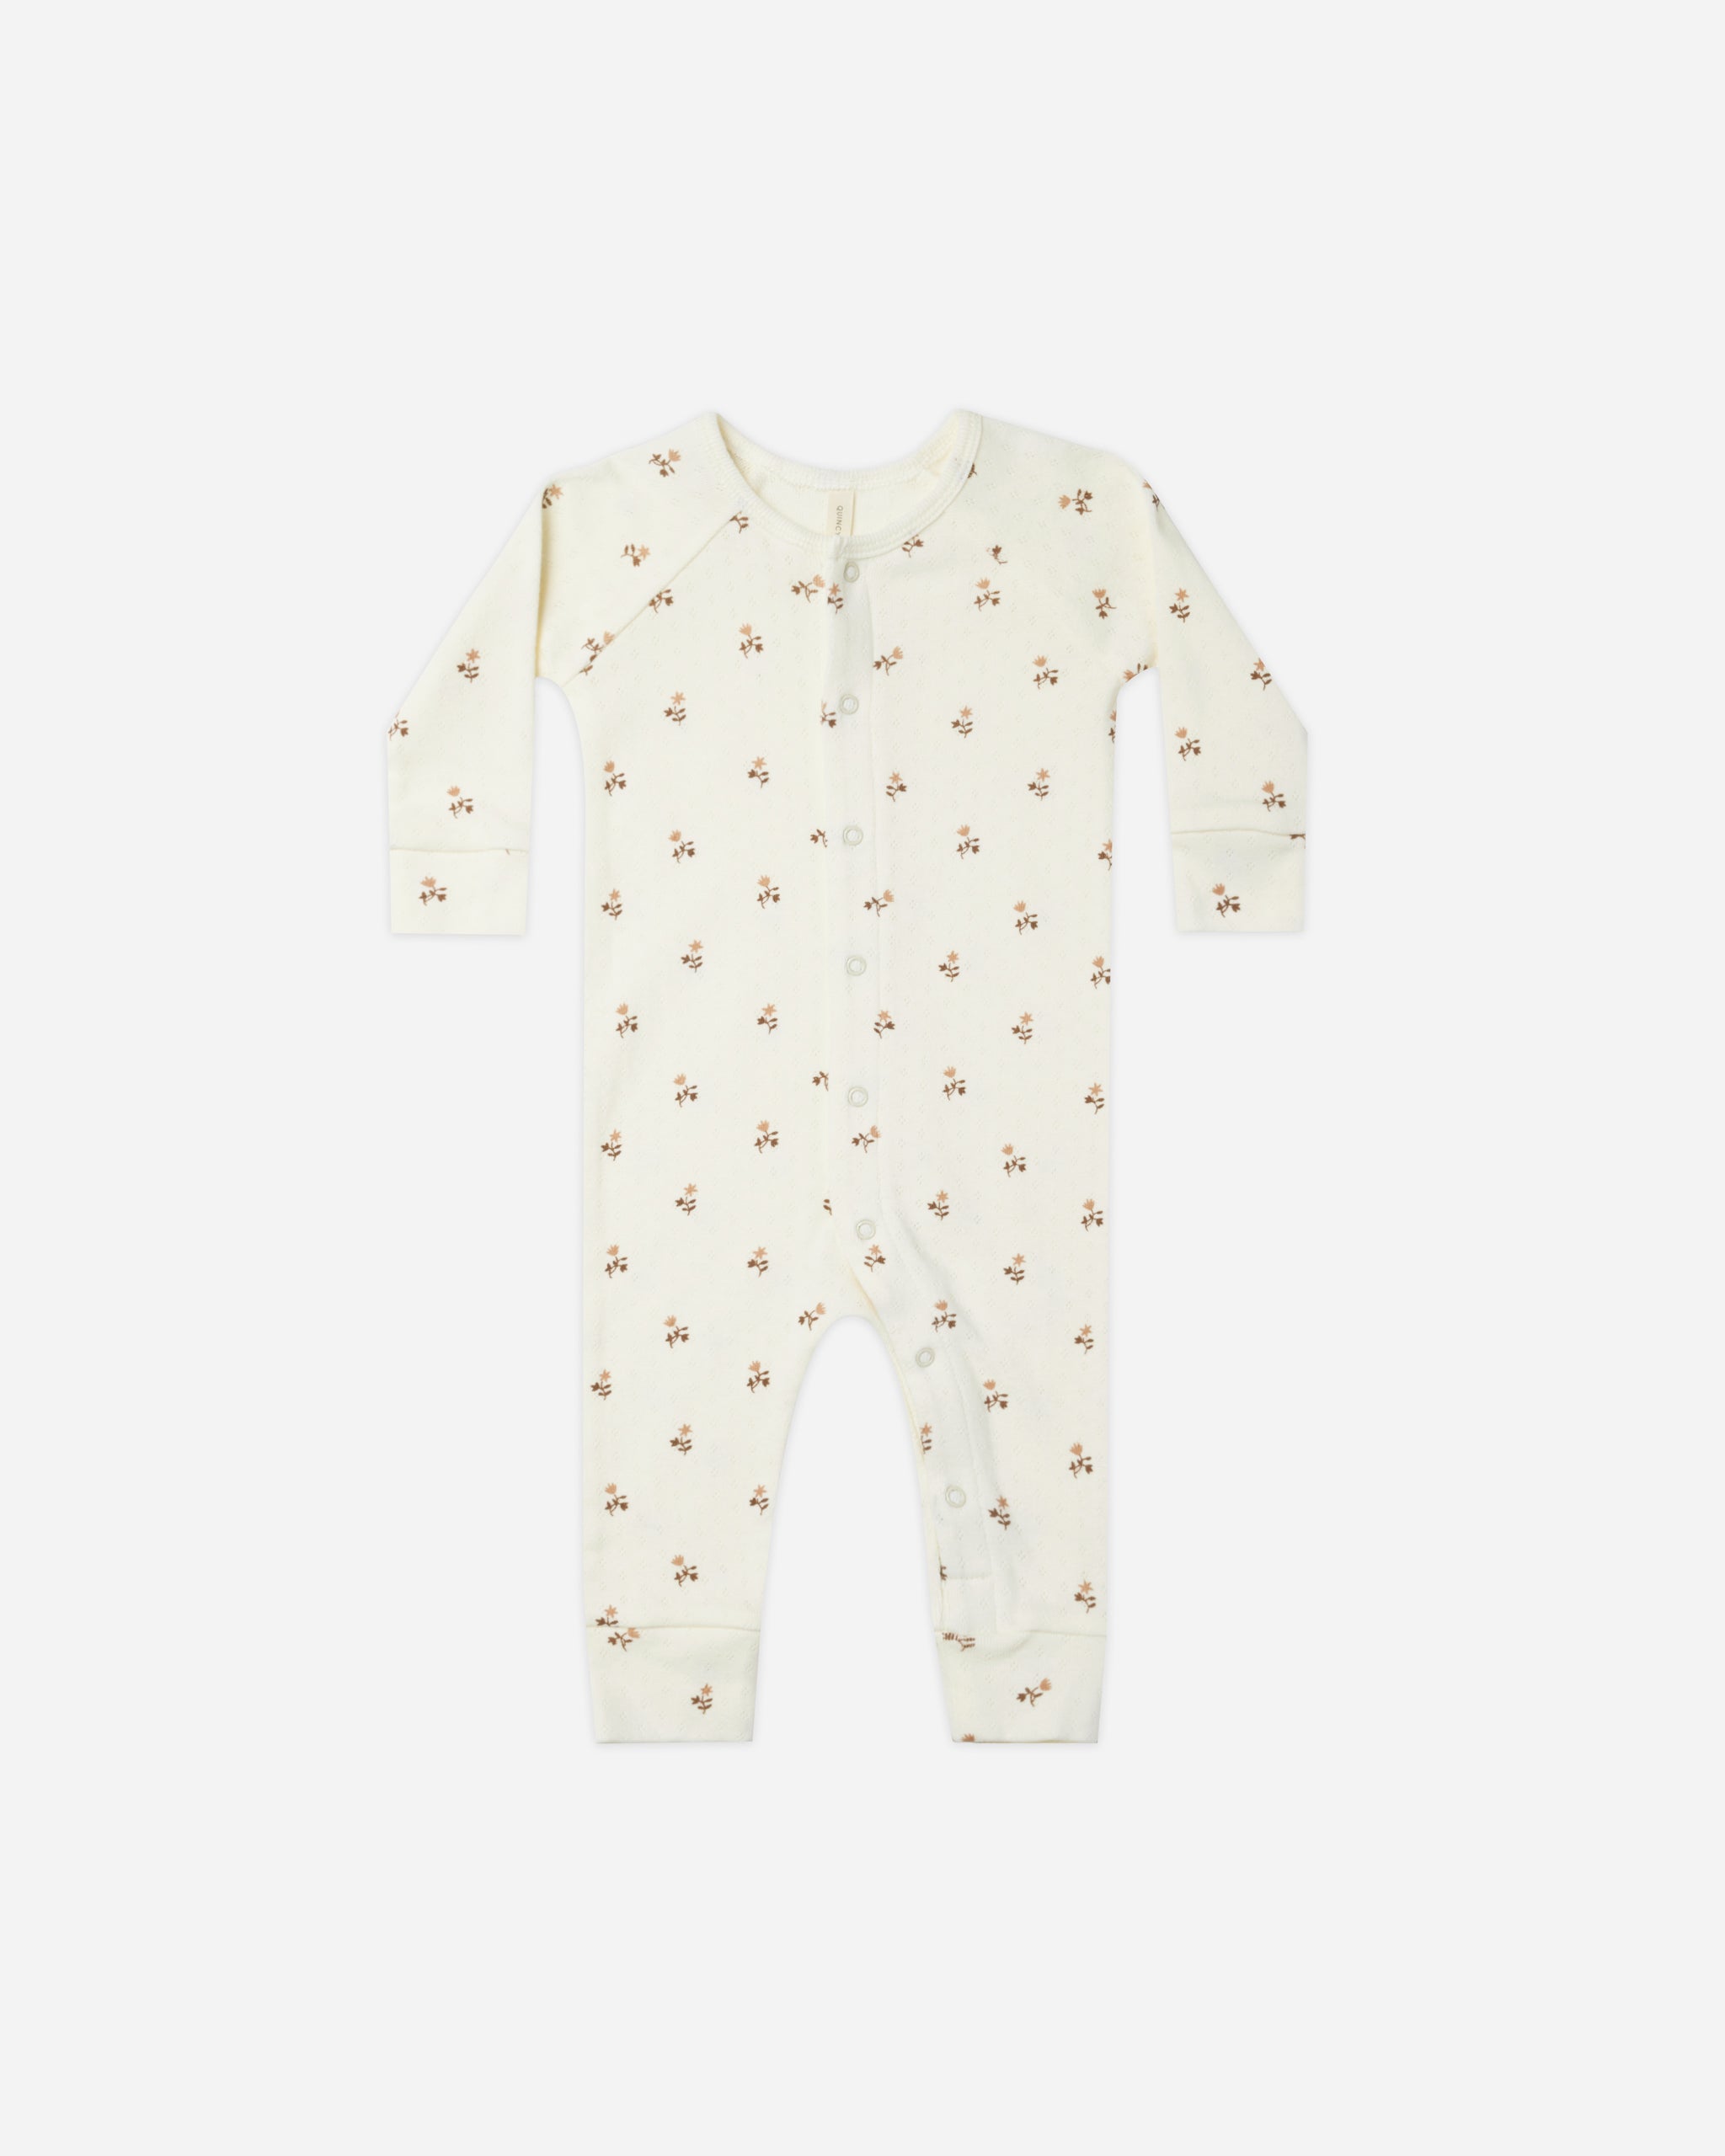 Pointelle Long John || Rose Fleur - Rylee + Cru | Kids Clothes | Trendy Baby Clothes | Modern Infant Outfits |